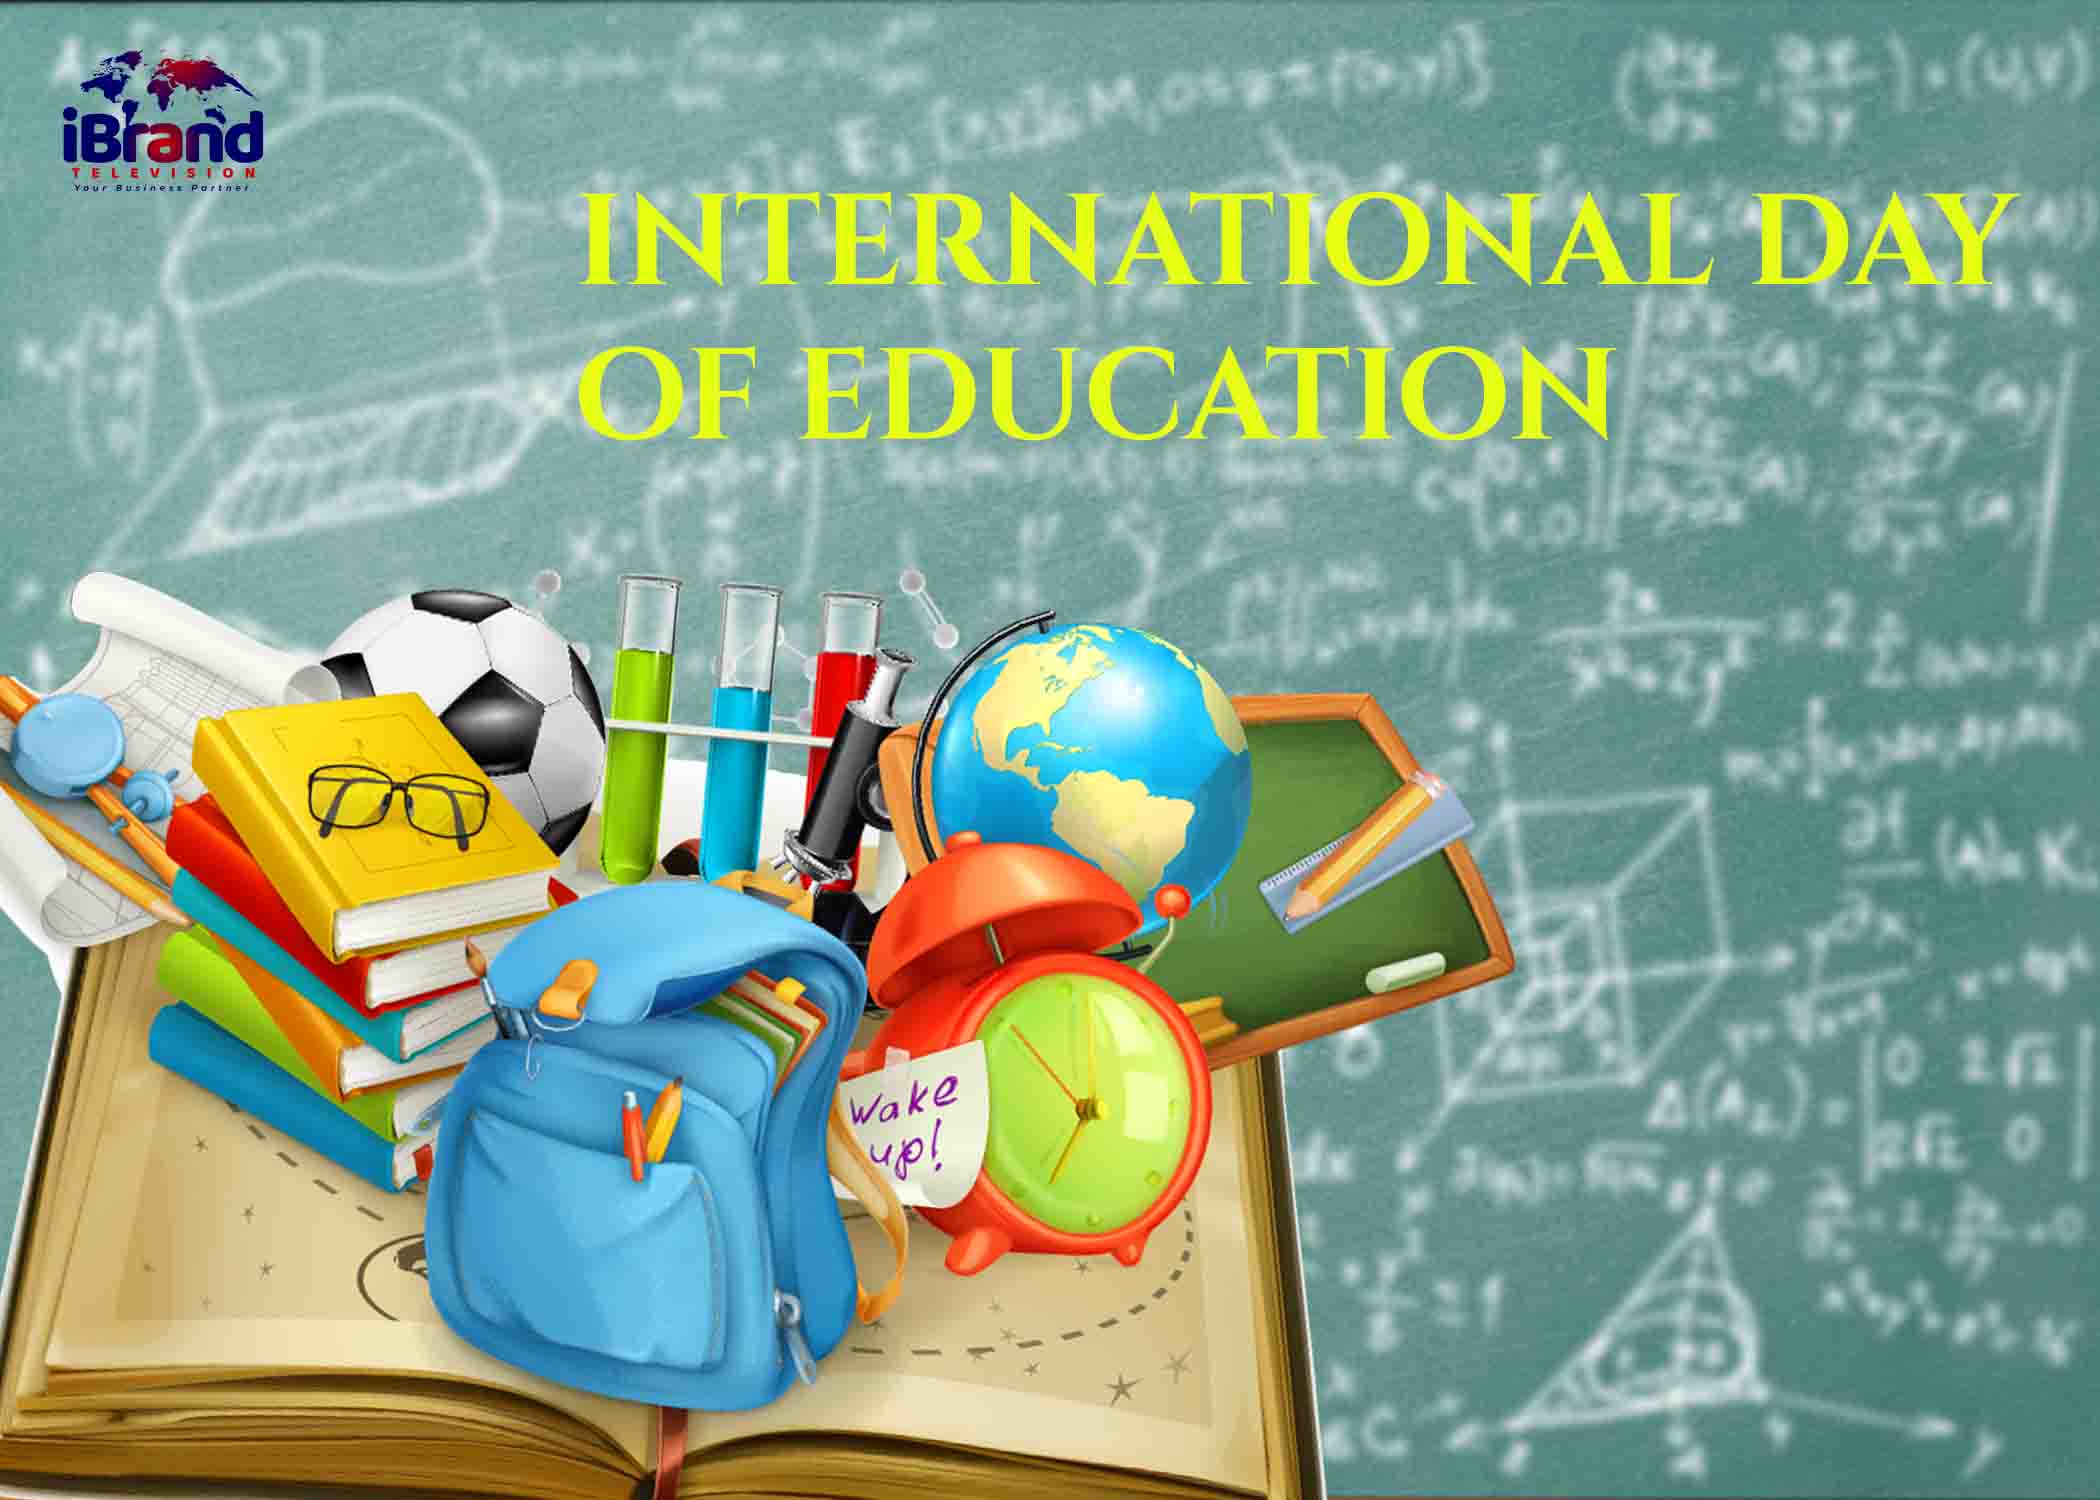 5 Intriguing Facts About Education on International Day of Learning